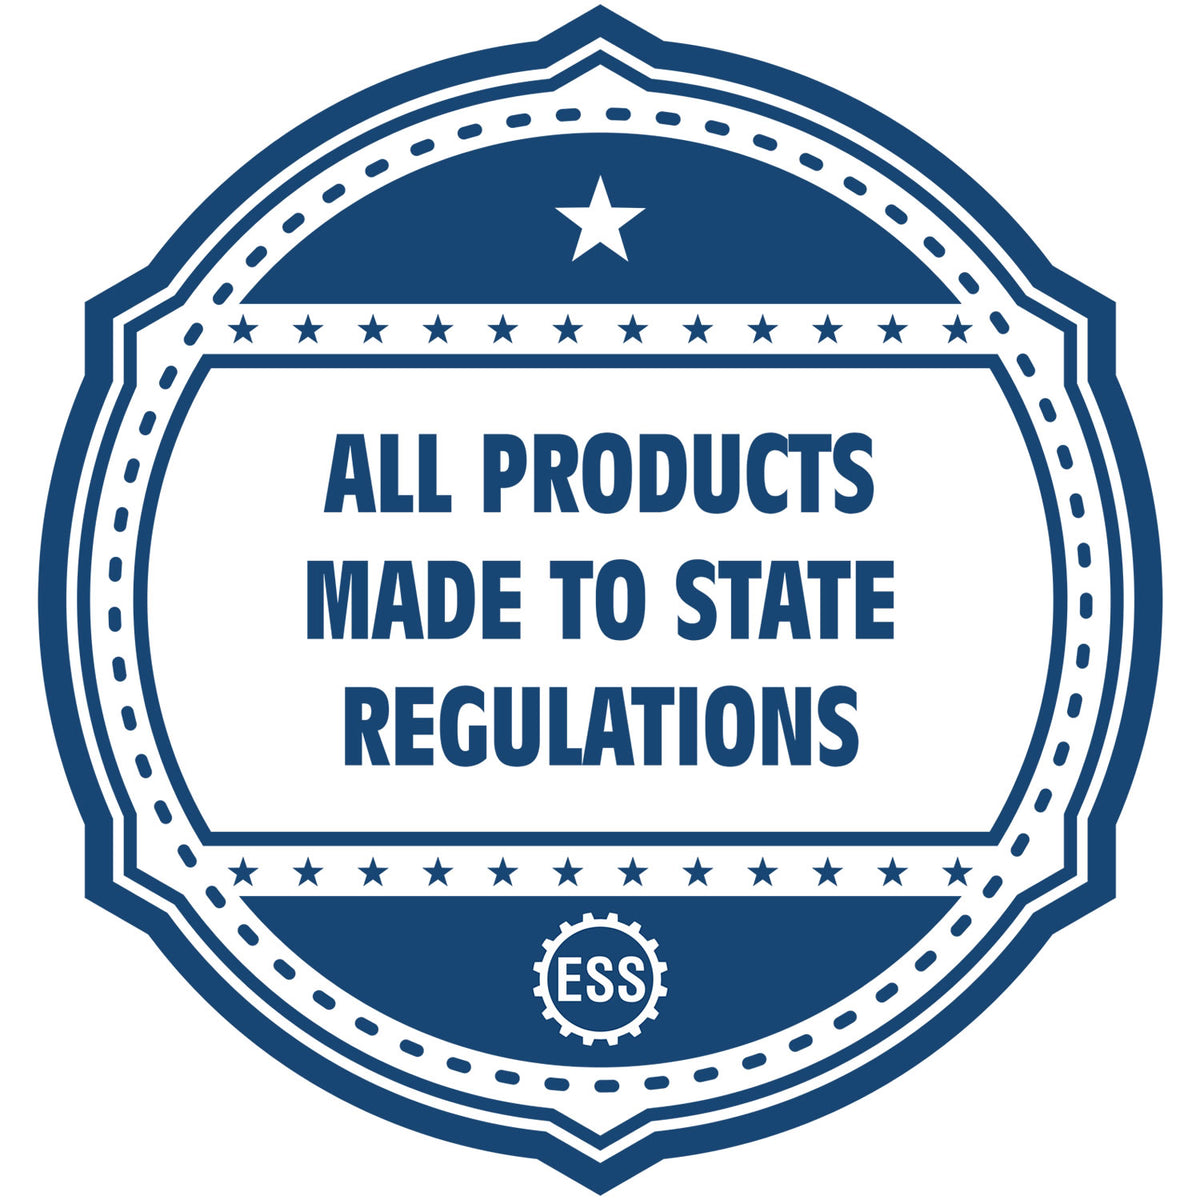 An icon or badge element for the Handheld Maryland Land Surveyor Seal showing that this product is made in compliance with state regulations.